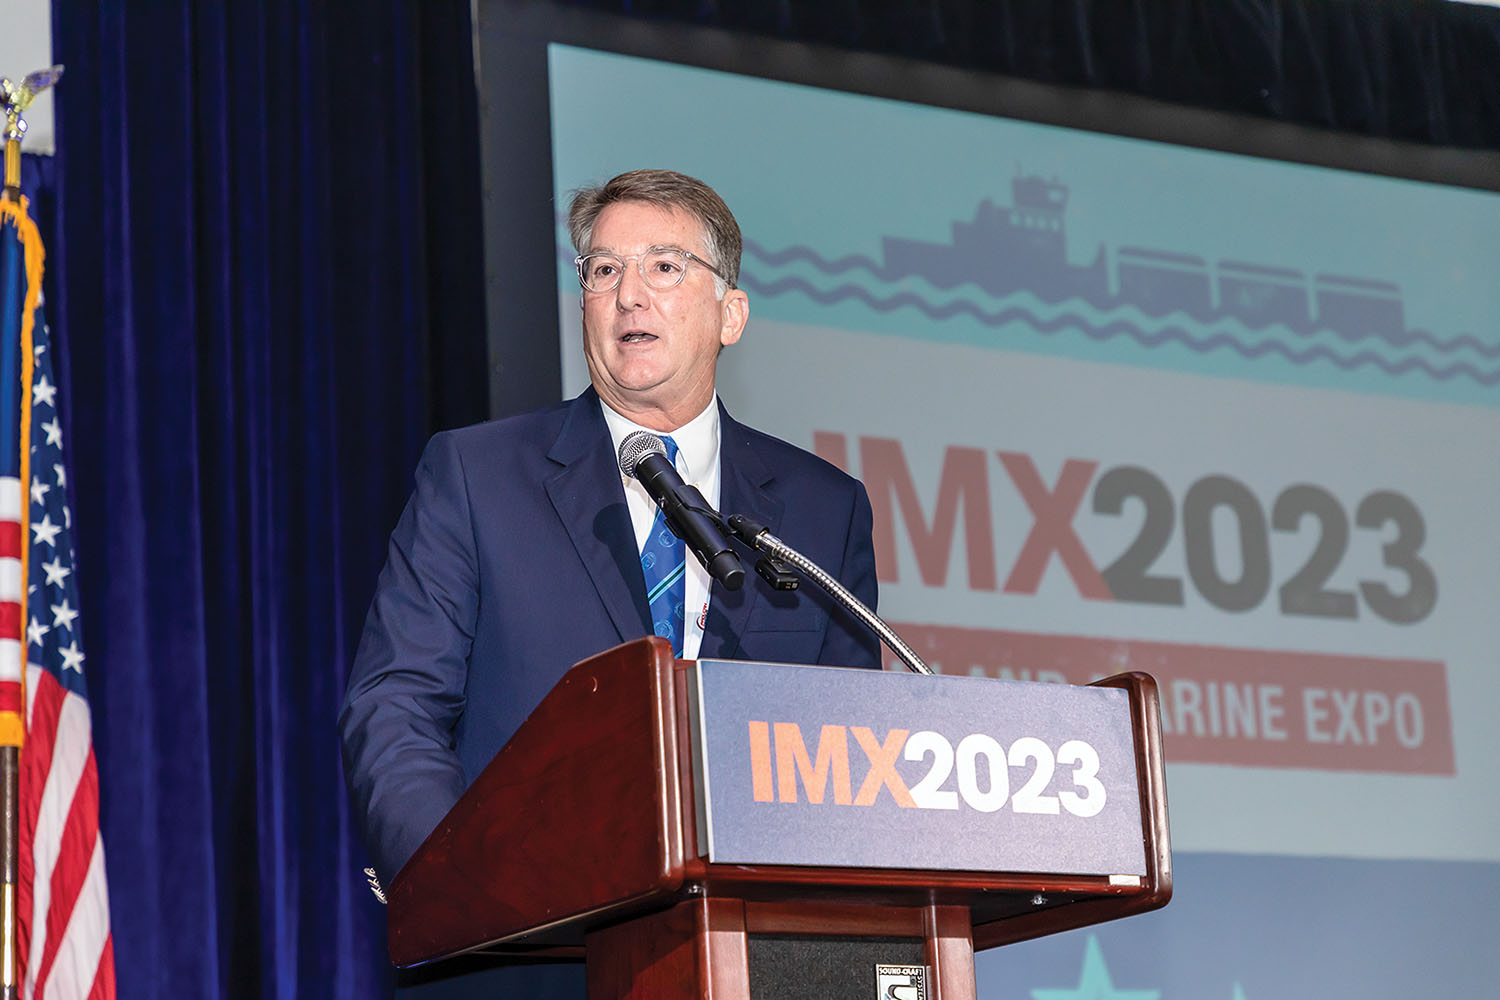 The Rev. Mark Nestlehutt, president and executive director of the Seamen’s Church Institute, speaks at the Inland Marine Expo.